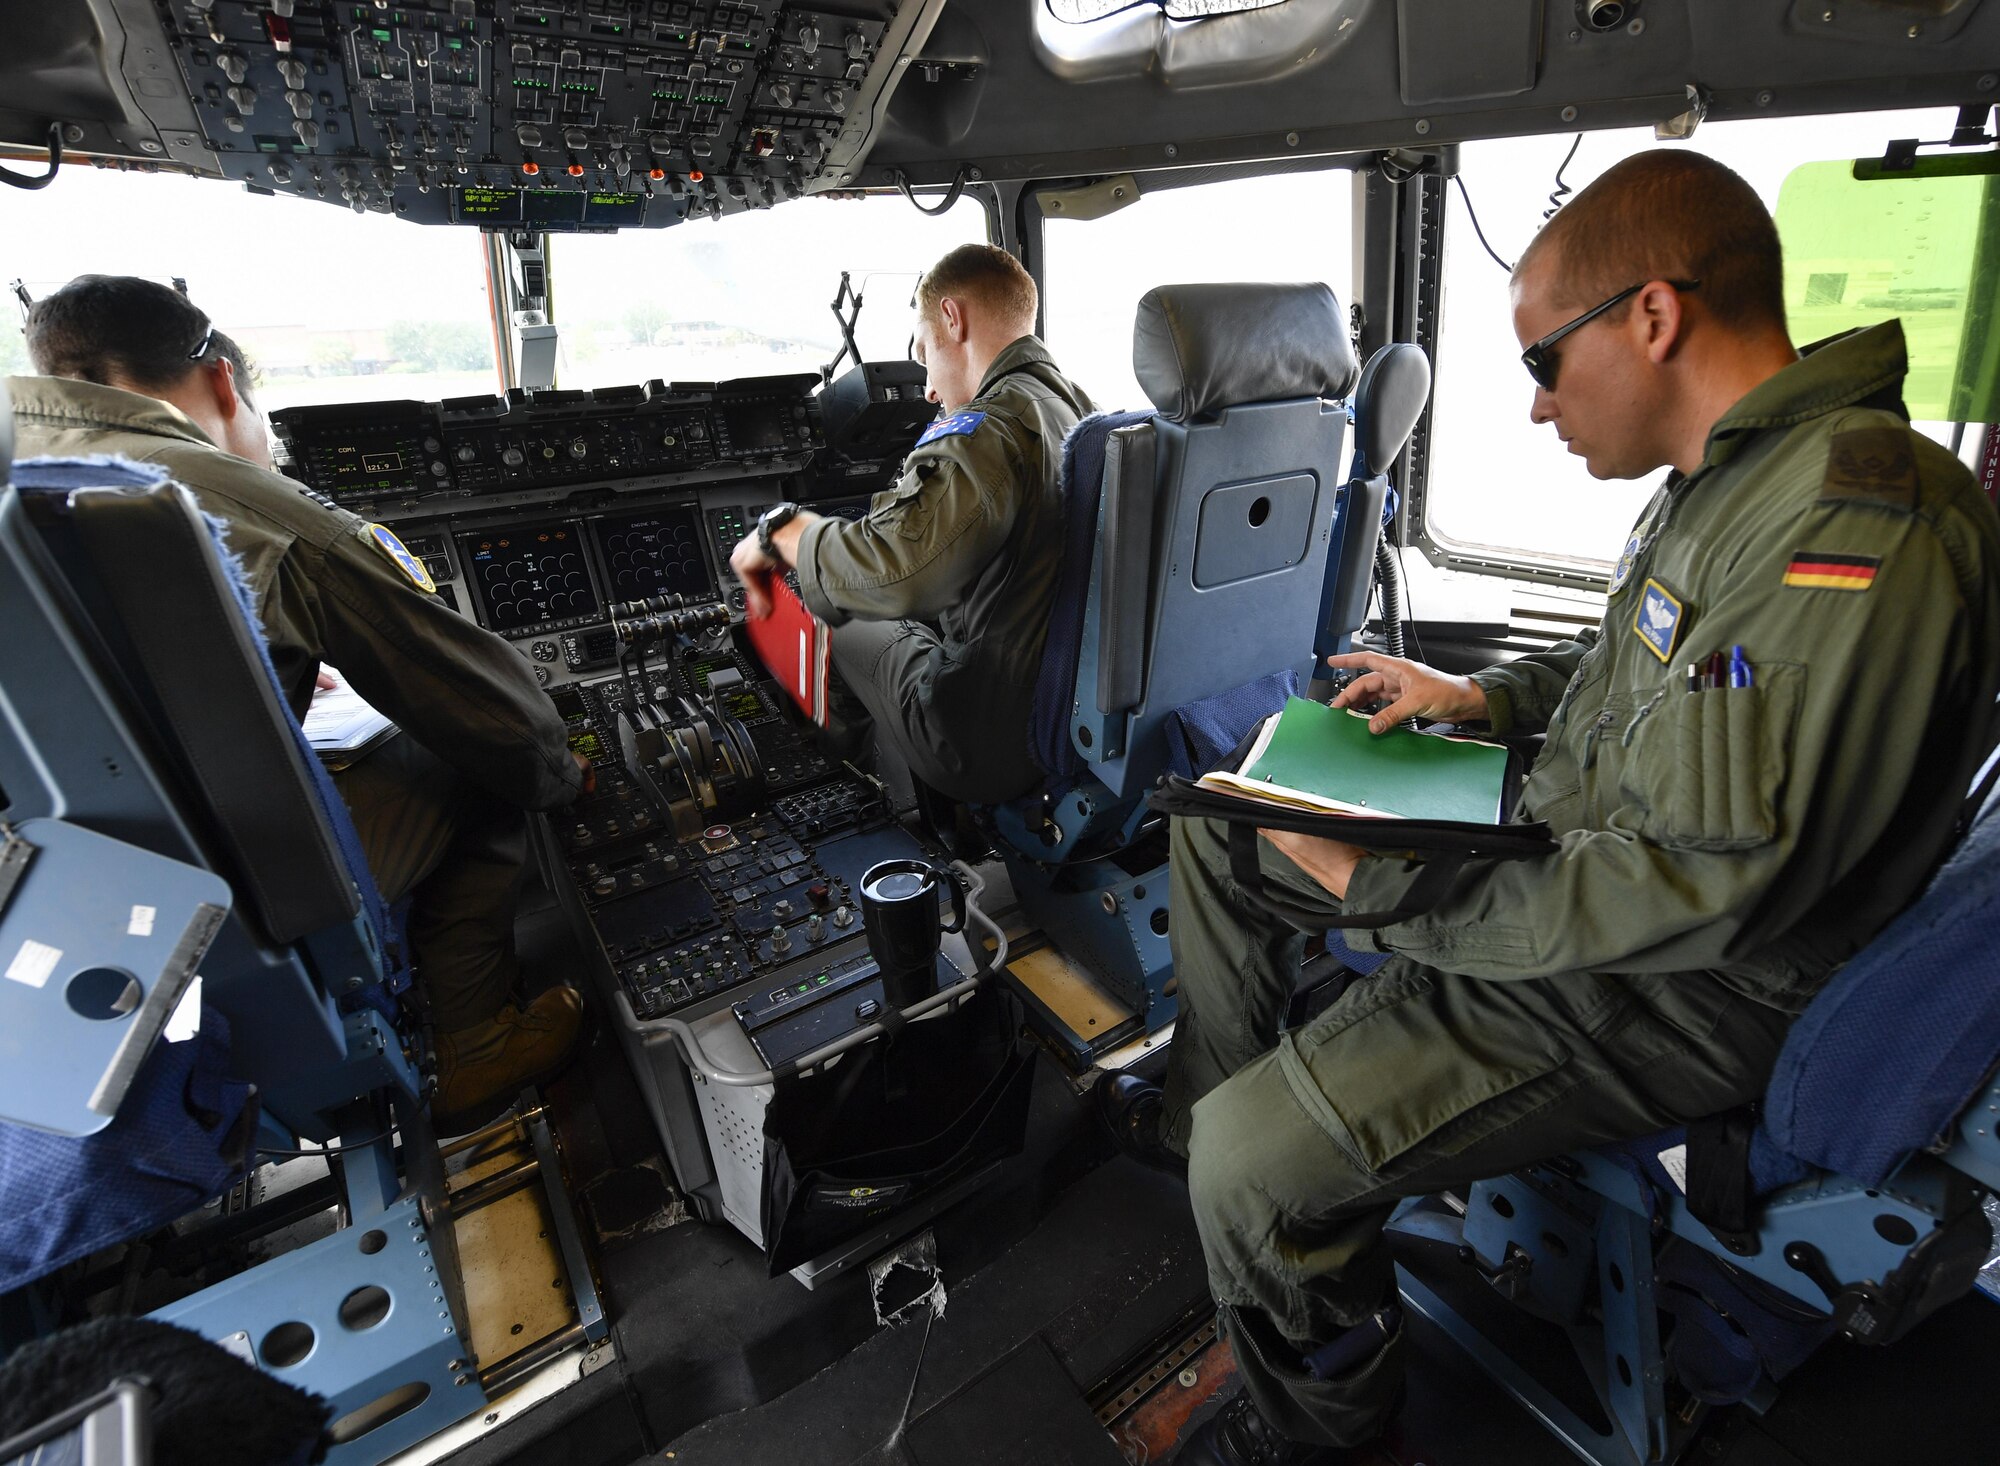 Aircrew members, assigned to the 14th and 15th Airlift Squadrons, participating in the foreign exchange pilot program discuss mission details prior to a flight here June 26, 2017. The program strives to promote mutual understanding and trust, enhance interoperability, strengthen air force to air force ties, and develop long-term professional and personal relationships between partnered countries.